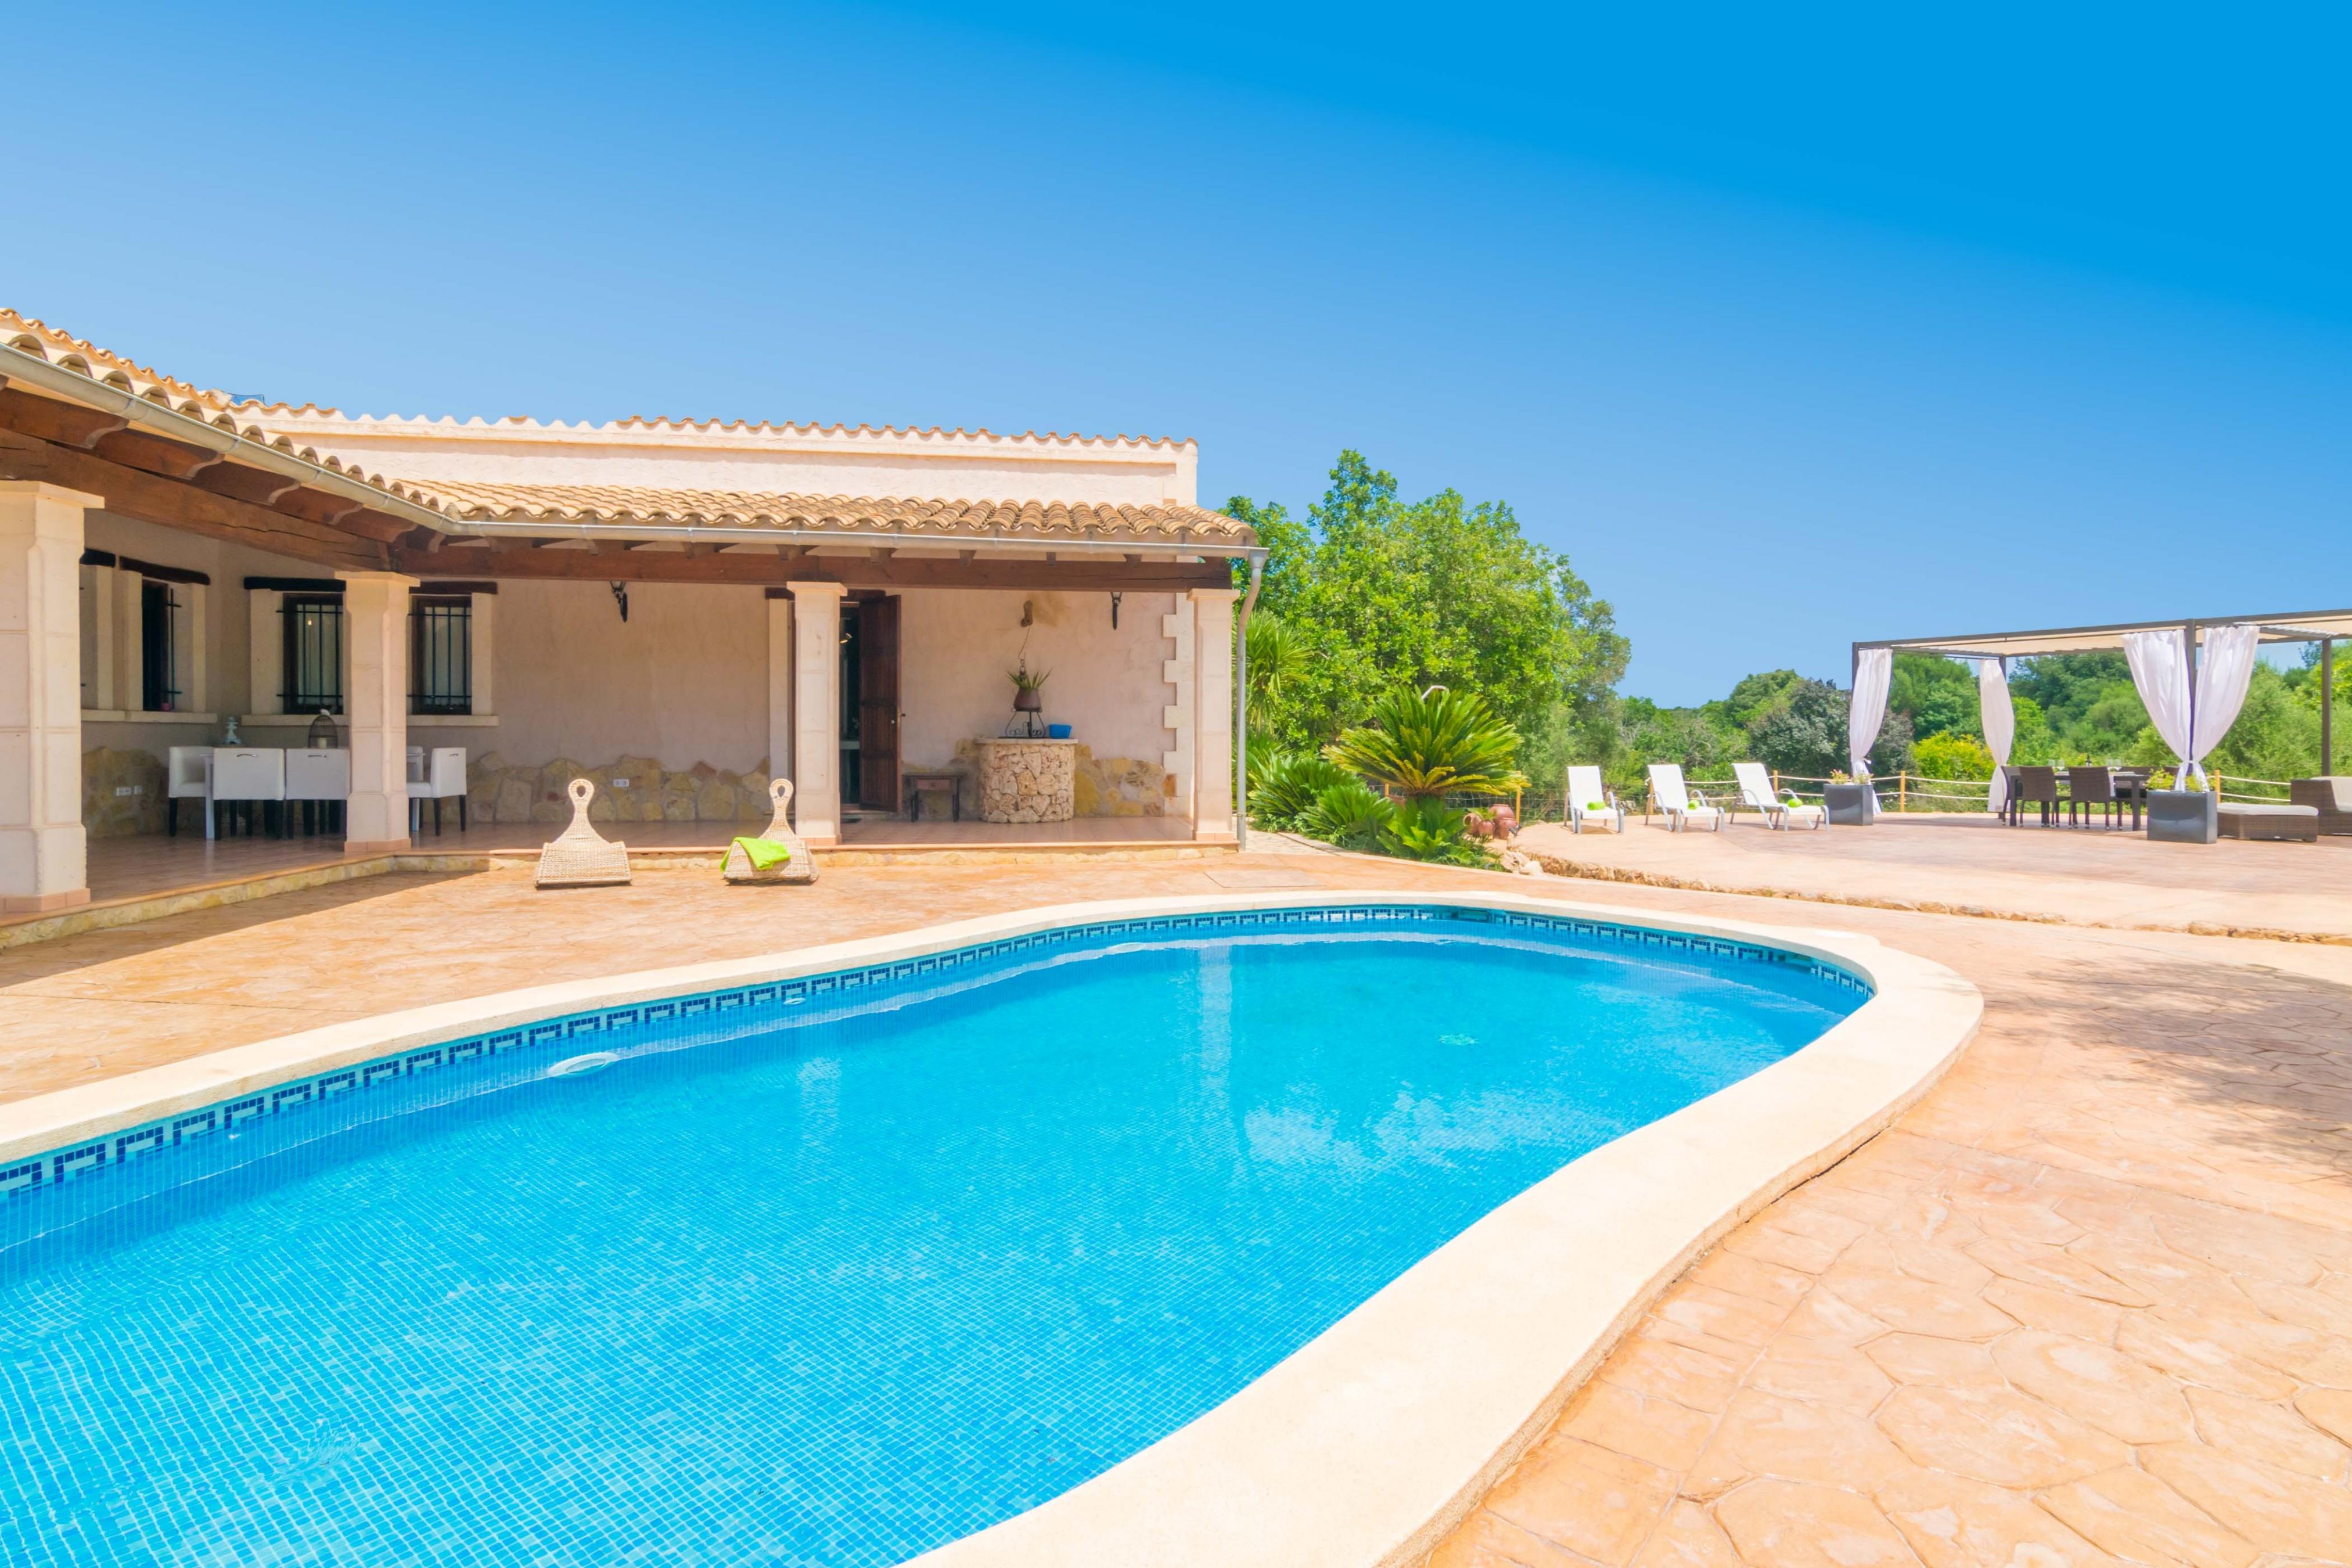 Property Image 2 - SON PERE GENET - Villa with private pool in Búger. Free WiFi